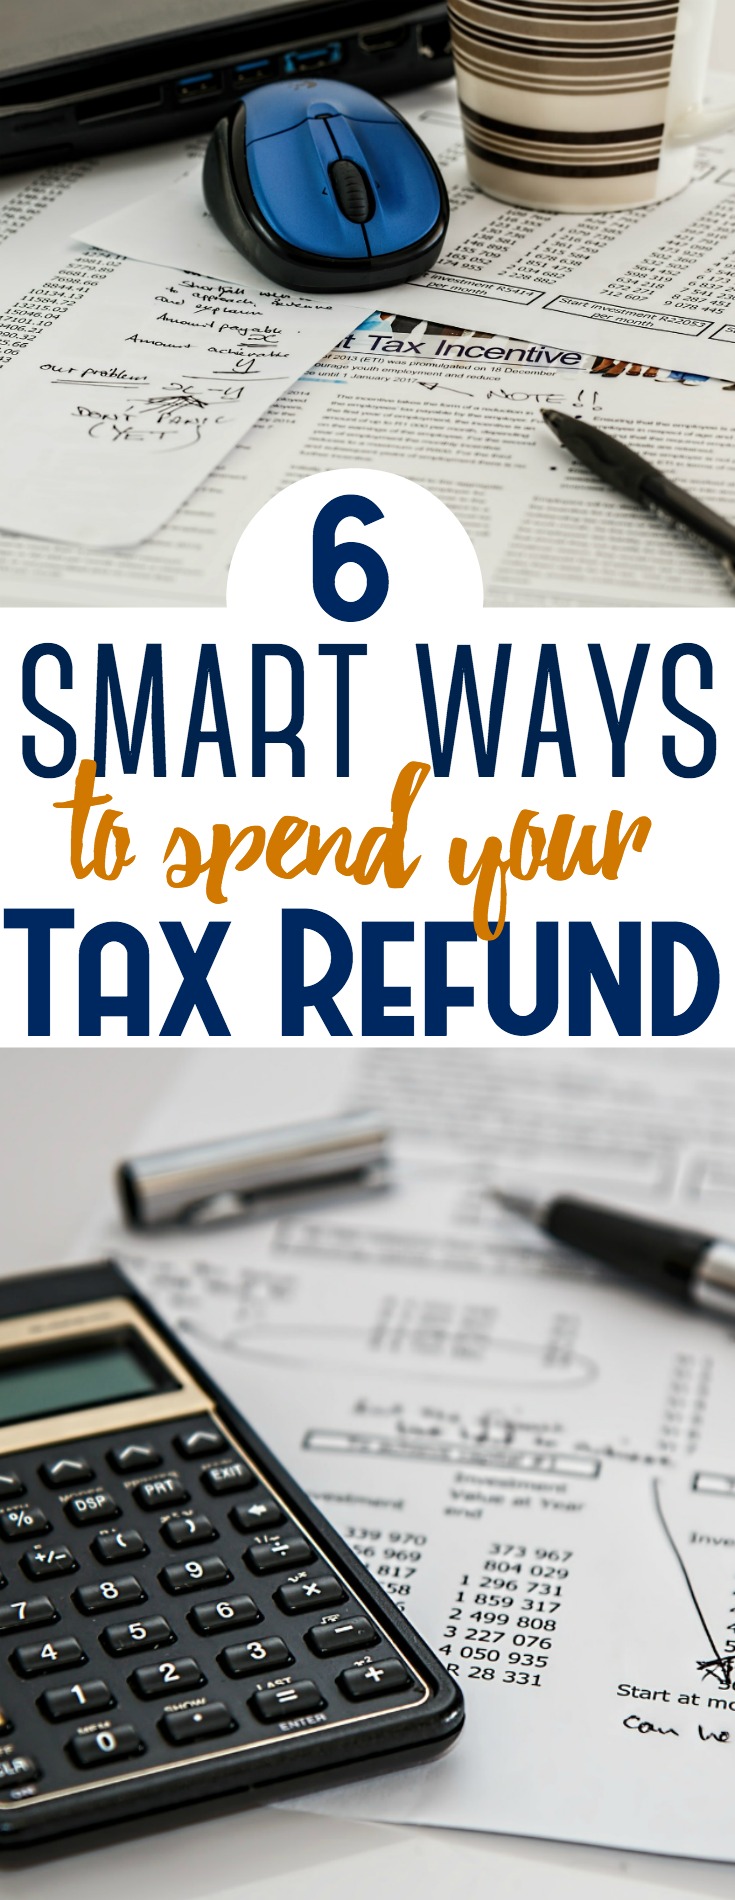 It's tax time - and that means a refund for many. If you haven't yet changed your withholdings to prevent the government from getting an interest free loan this past year, at least spend your refund wisely. Here are 6 smart ways to put that refund to work. #tax #refund #finance #budget #money #finance